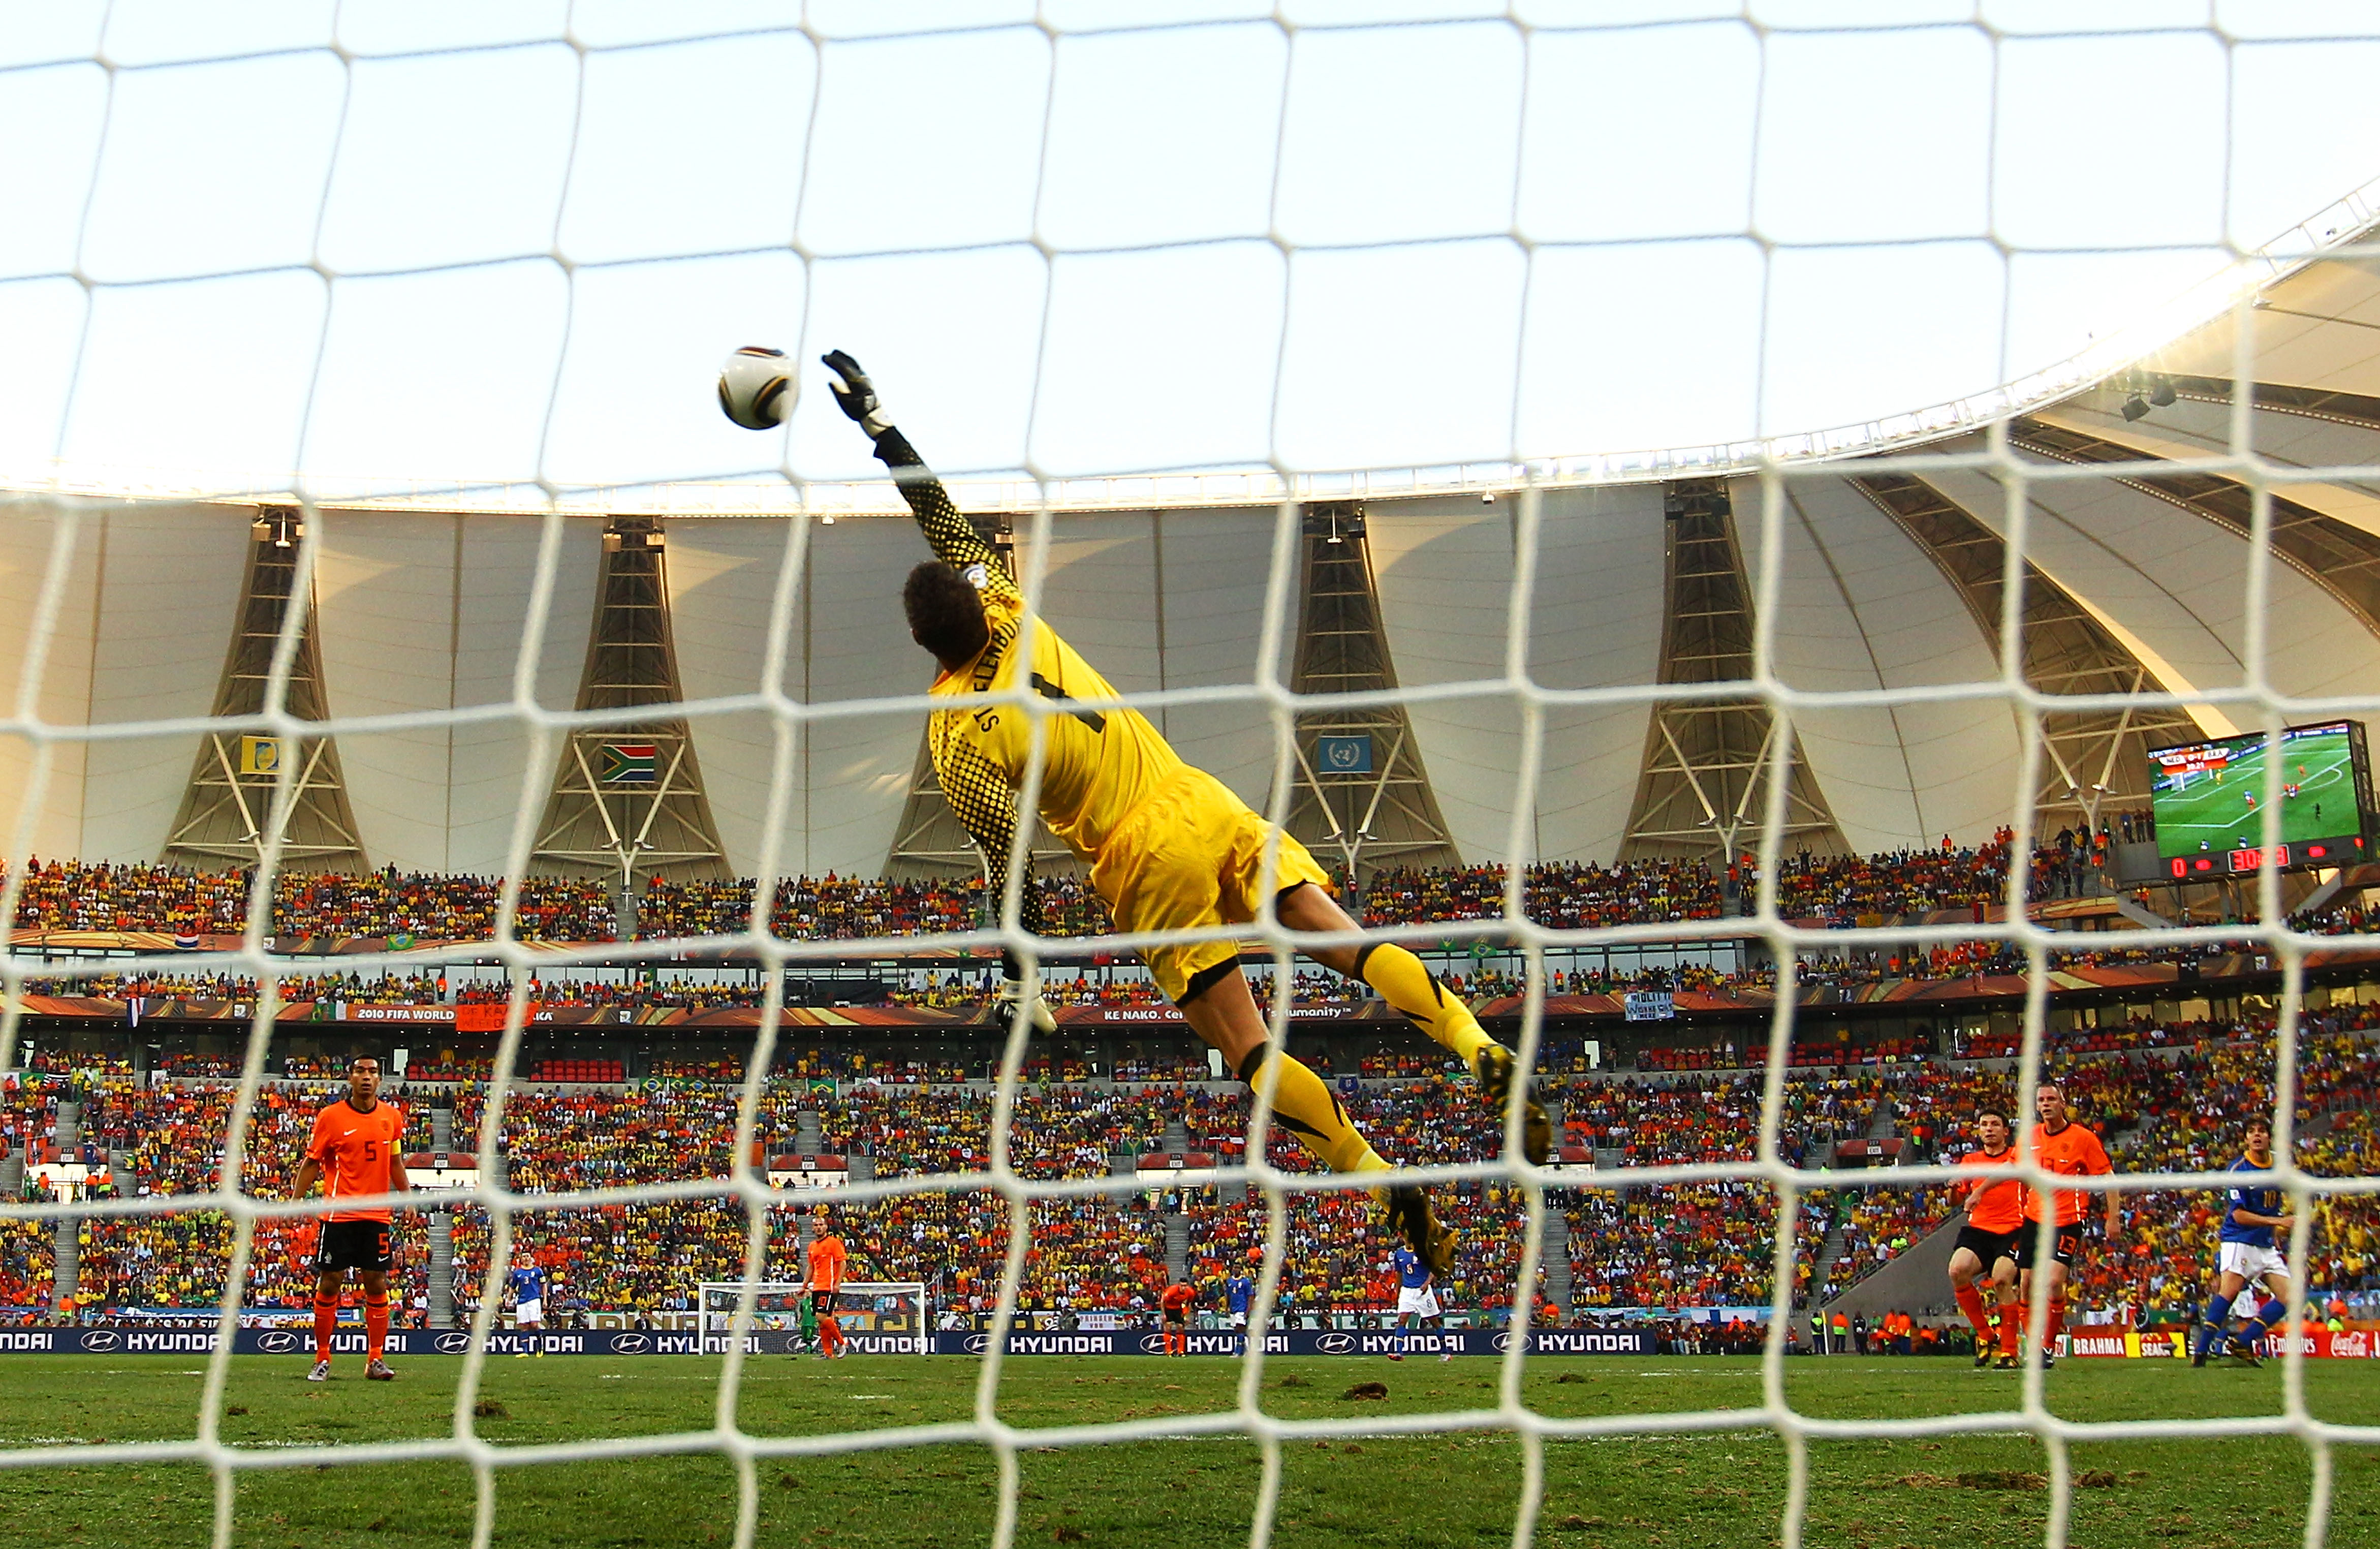 PORT ELIZABETH, SOUTH AFRICA - JULY 02: Maarten Stekelenburg of the Netherlands makes a diving save from a Kaka shot during the 2010 FIFA World Cup South Africa Quarter Final match between Netherlands and Brazil at Nelson Mandela Bay Stadium on July 2, 20